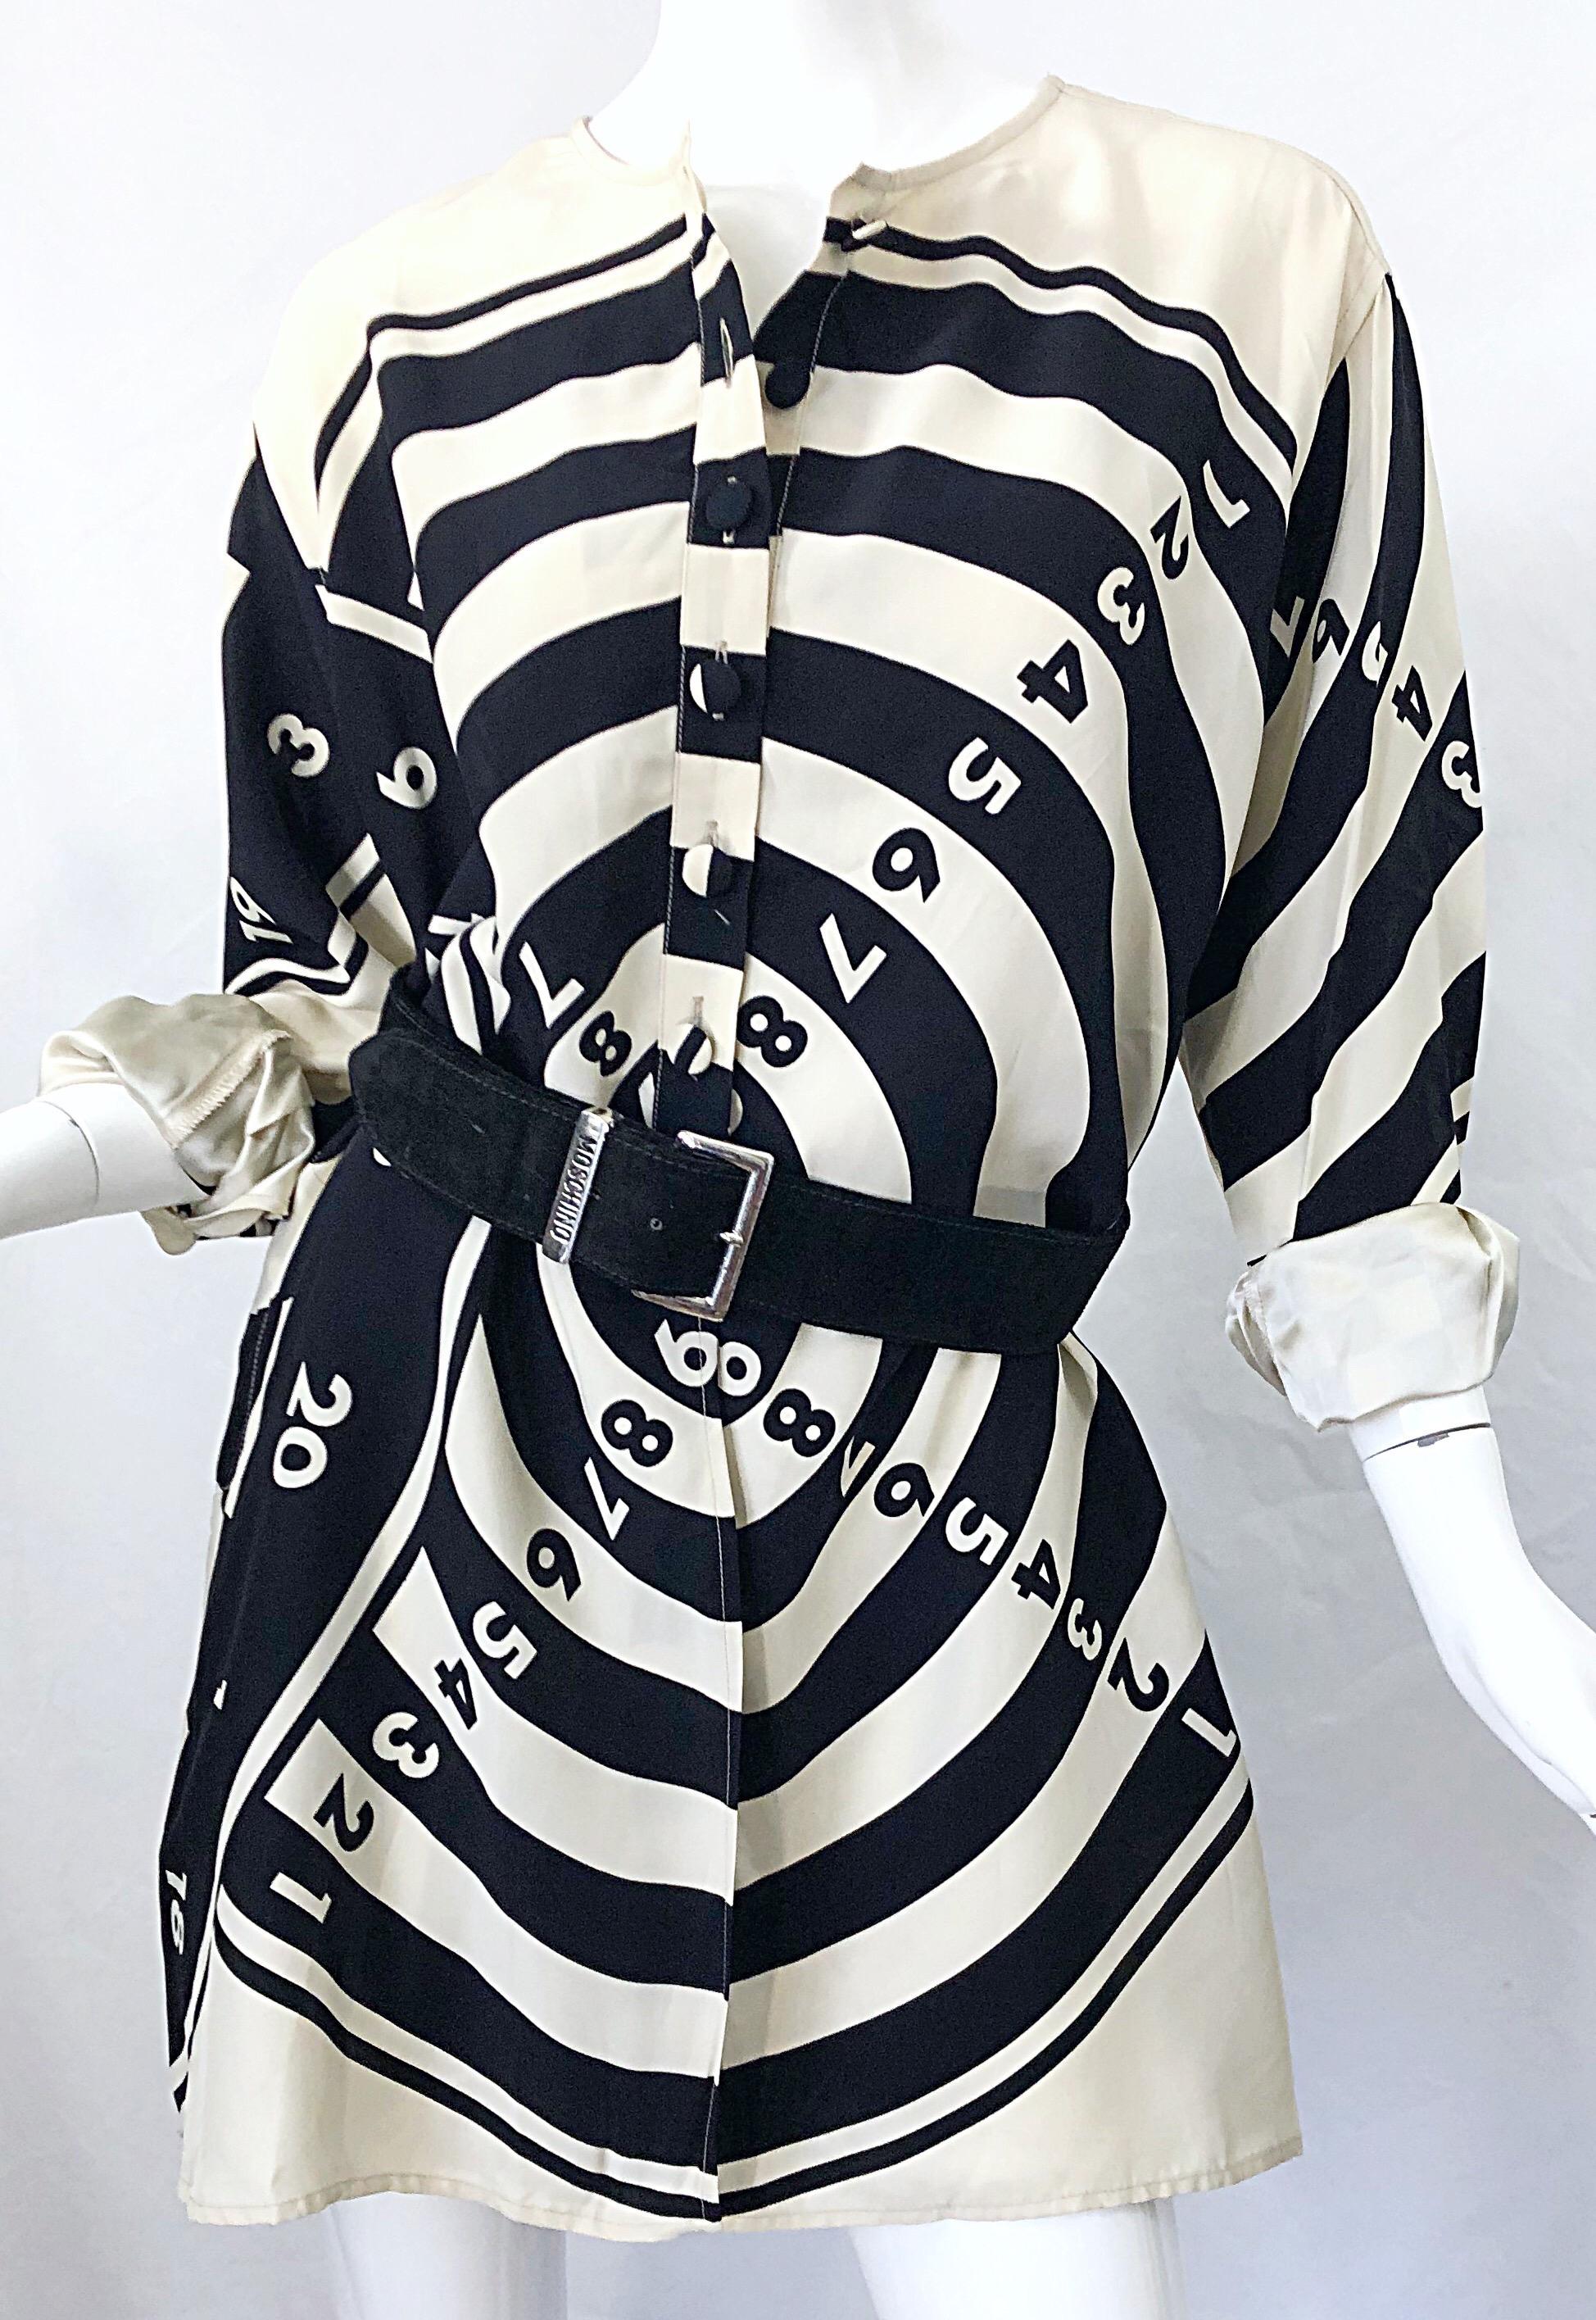 1980s Moschino Cheap & Chic Bullseye Black and White Size 8 Vintage Tunic Dress For Sale 10